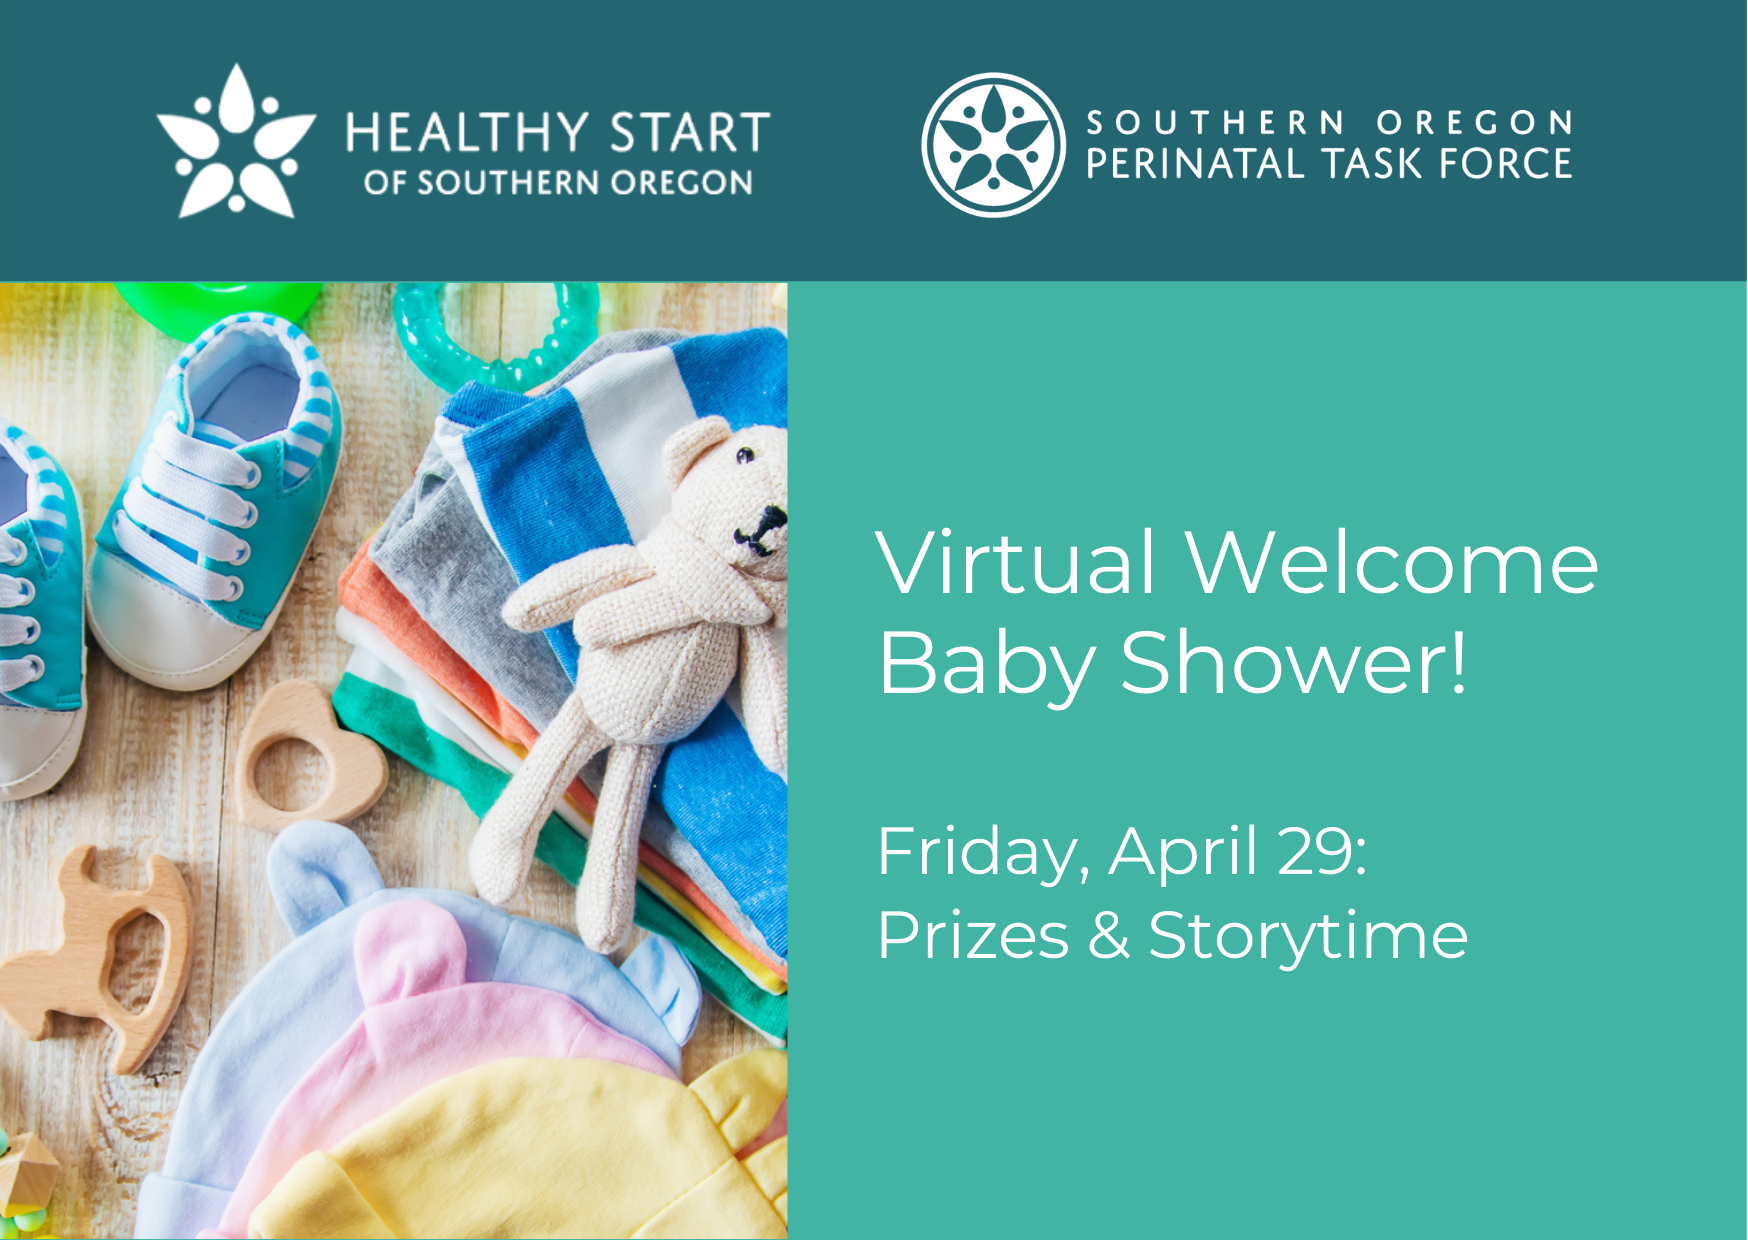 Welcome Baby Shower: Friday April 29, 2022 - Prizes & Storytime